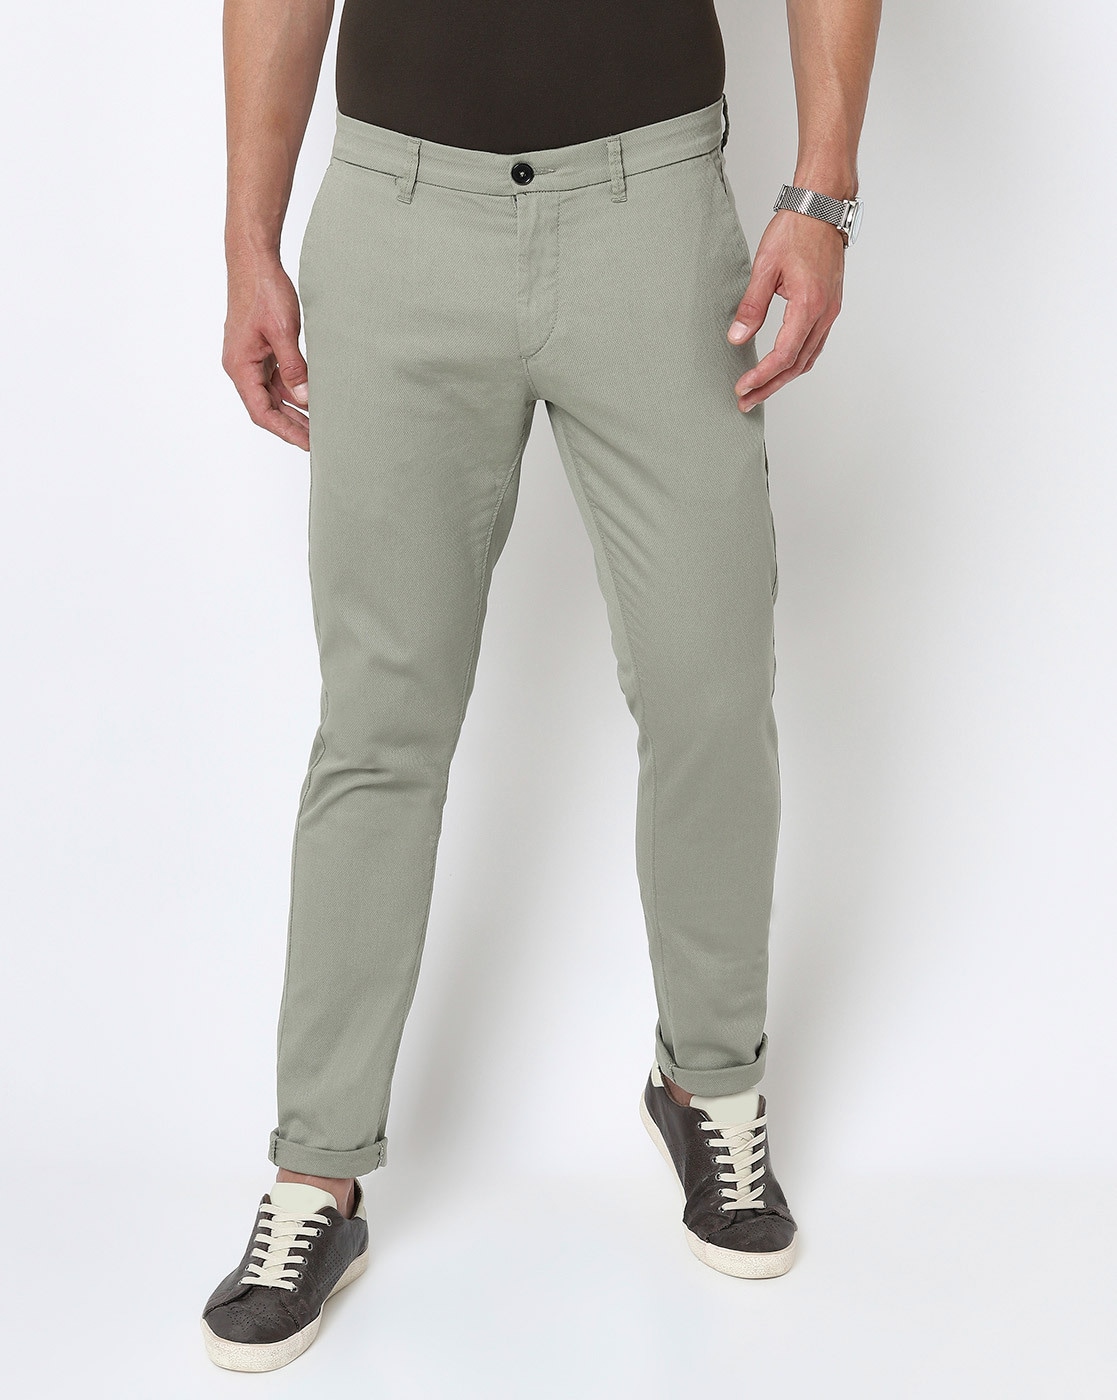 Discover more than 89 us polo pants online - in.eteachers